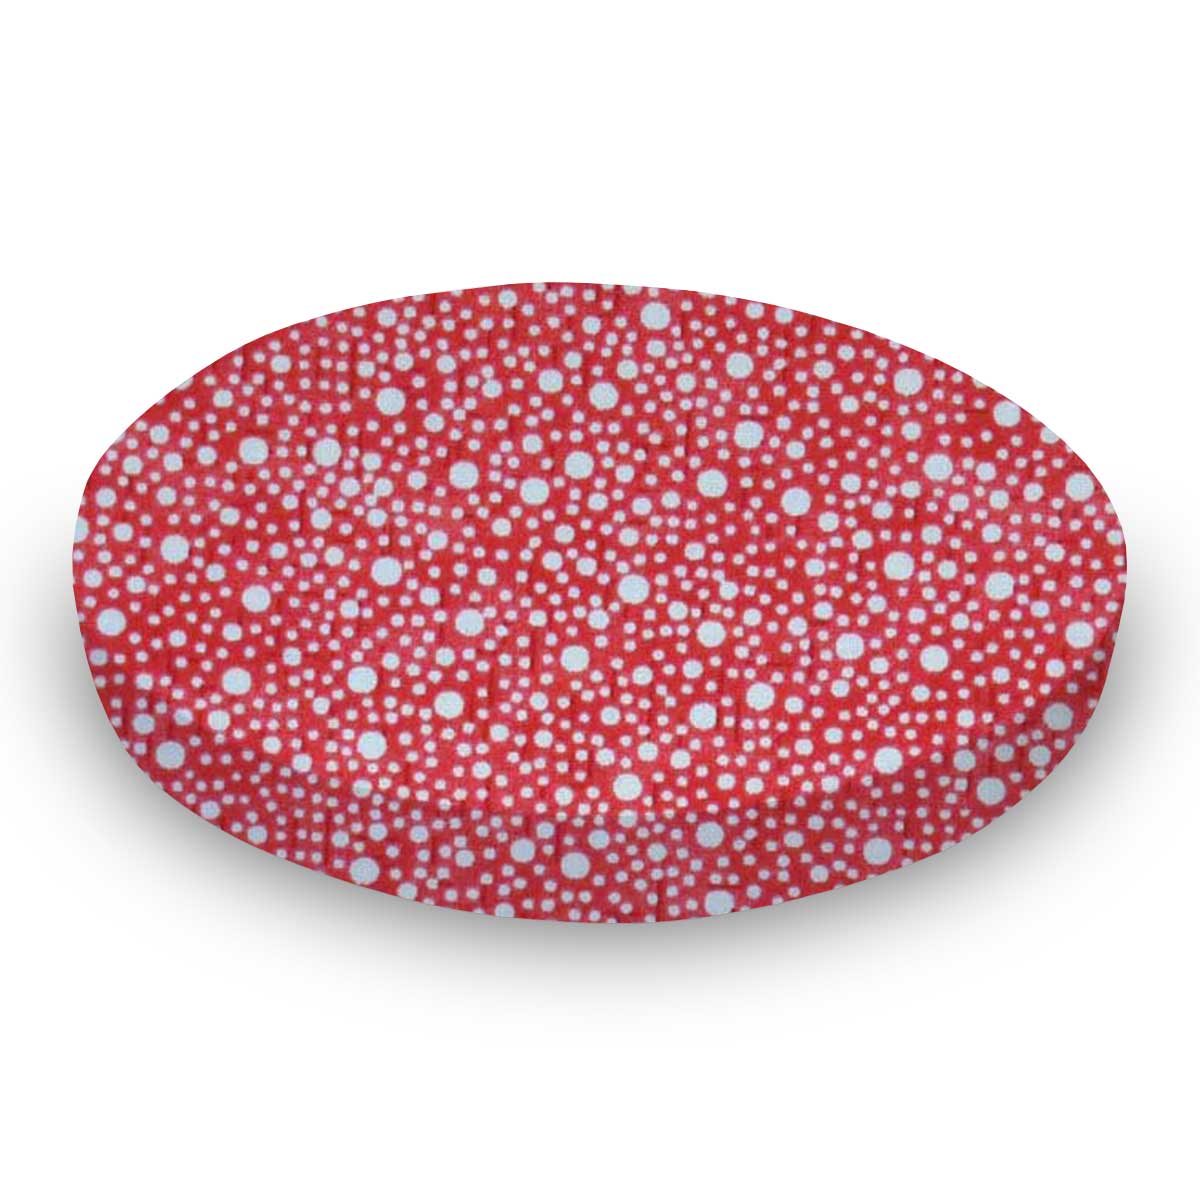 Oval Crib (Stokke Sleepi) - Confetti Dots Red - Fitted  Oval